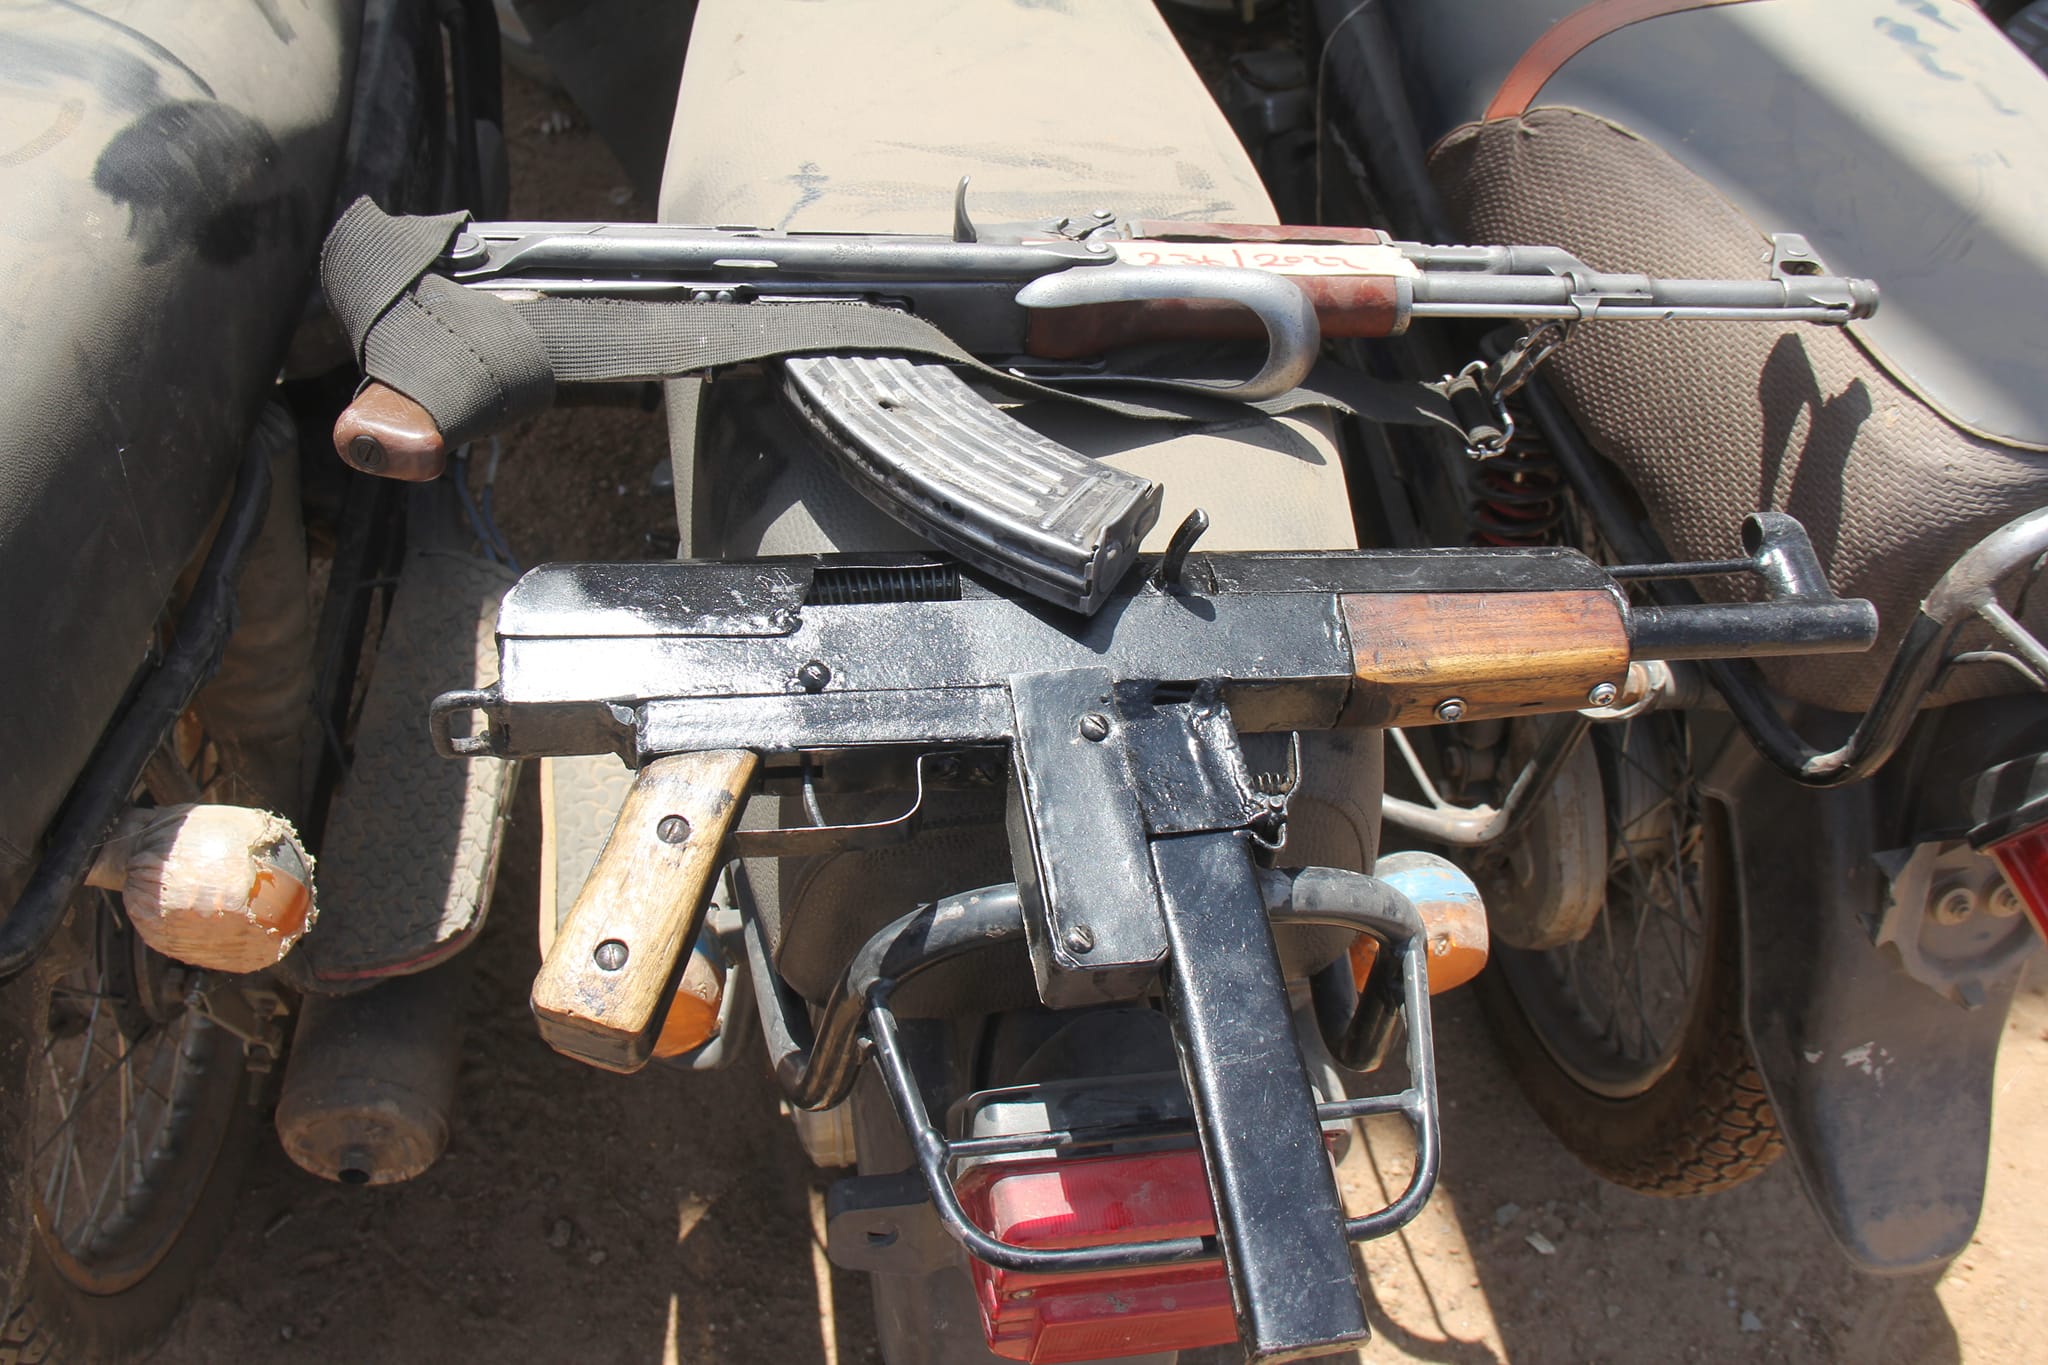 2023 Elections: Police recover 23 illegal firearms from miscreants in Bauchi